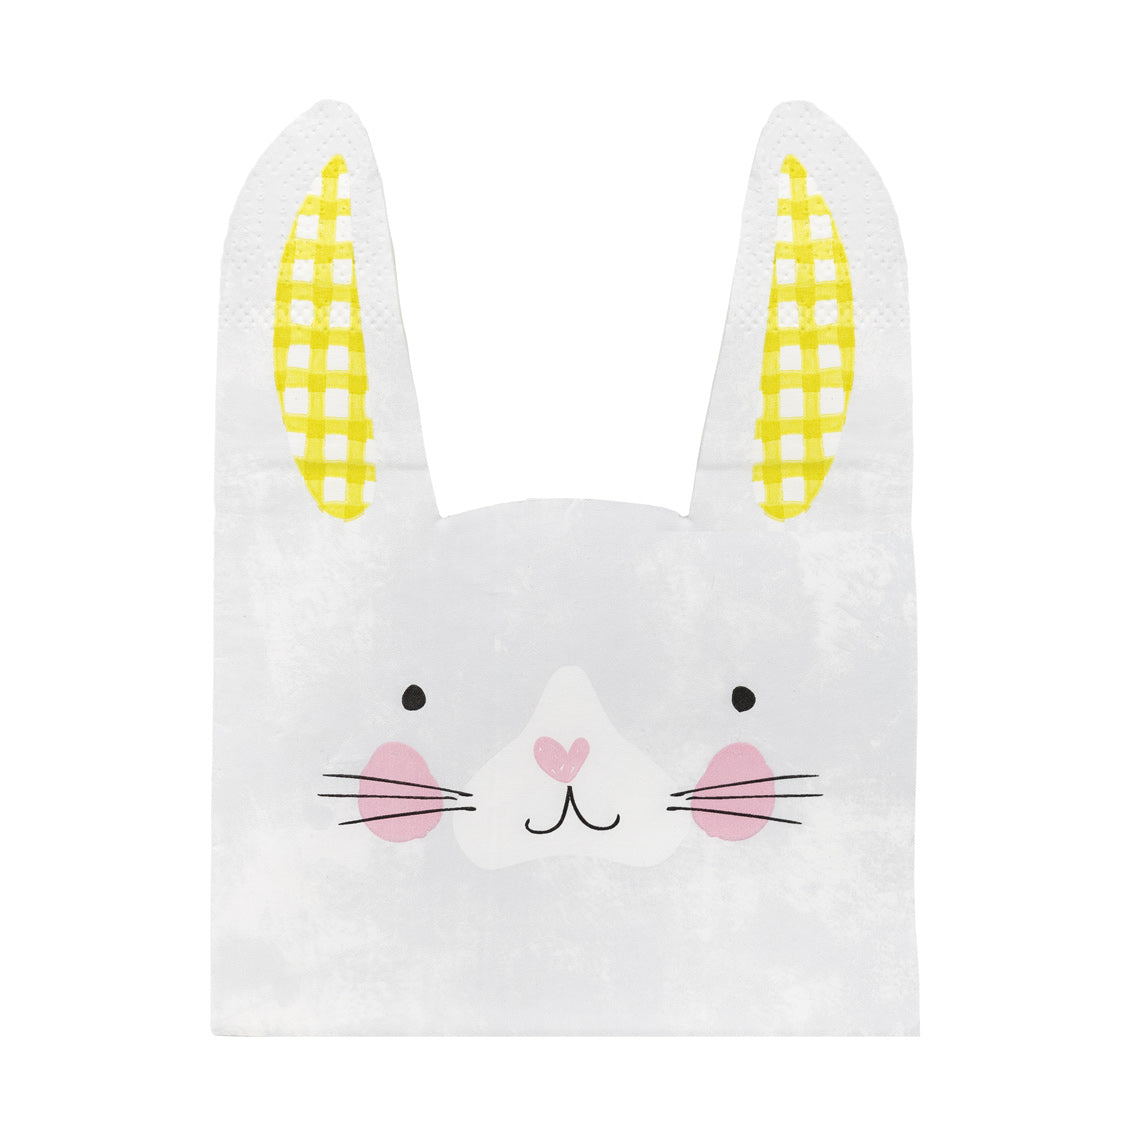 Bunny Shaped Paper Napkins - 20 Pack from penny black